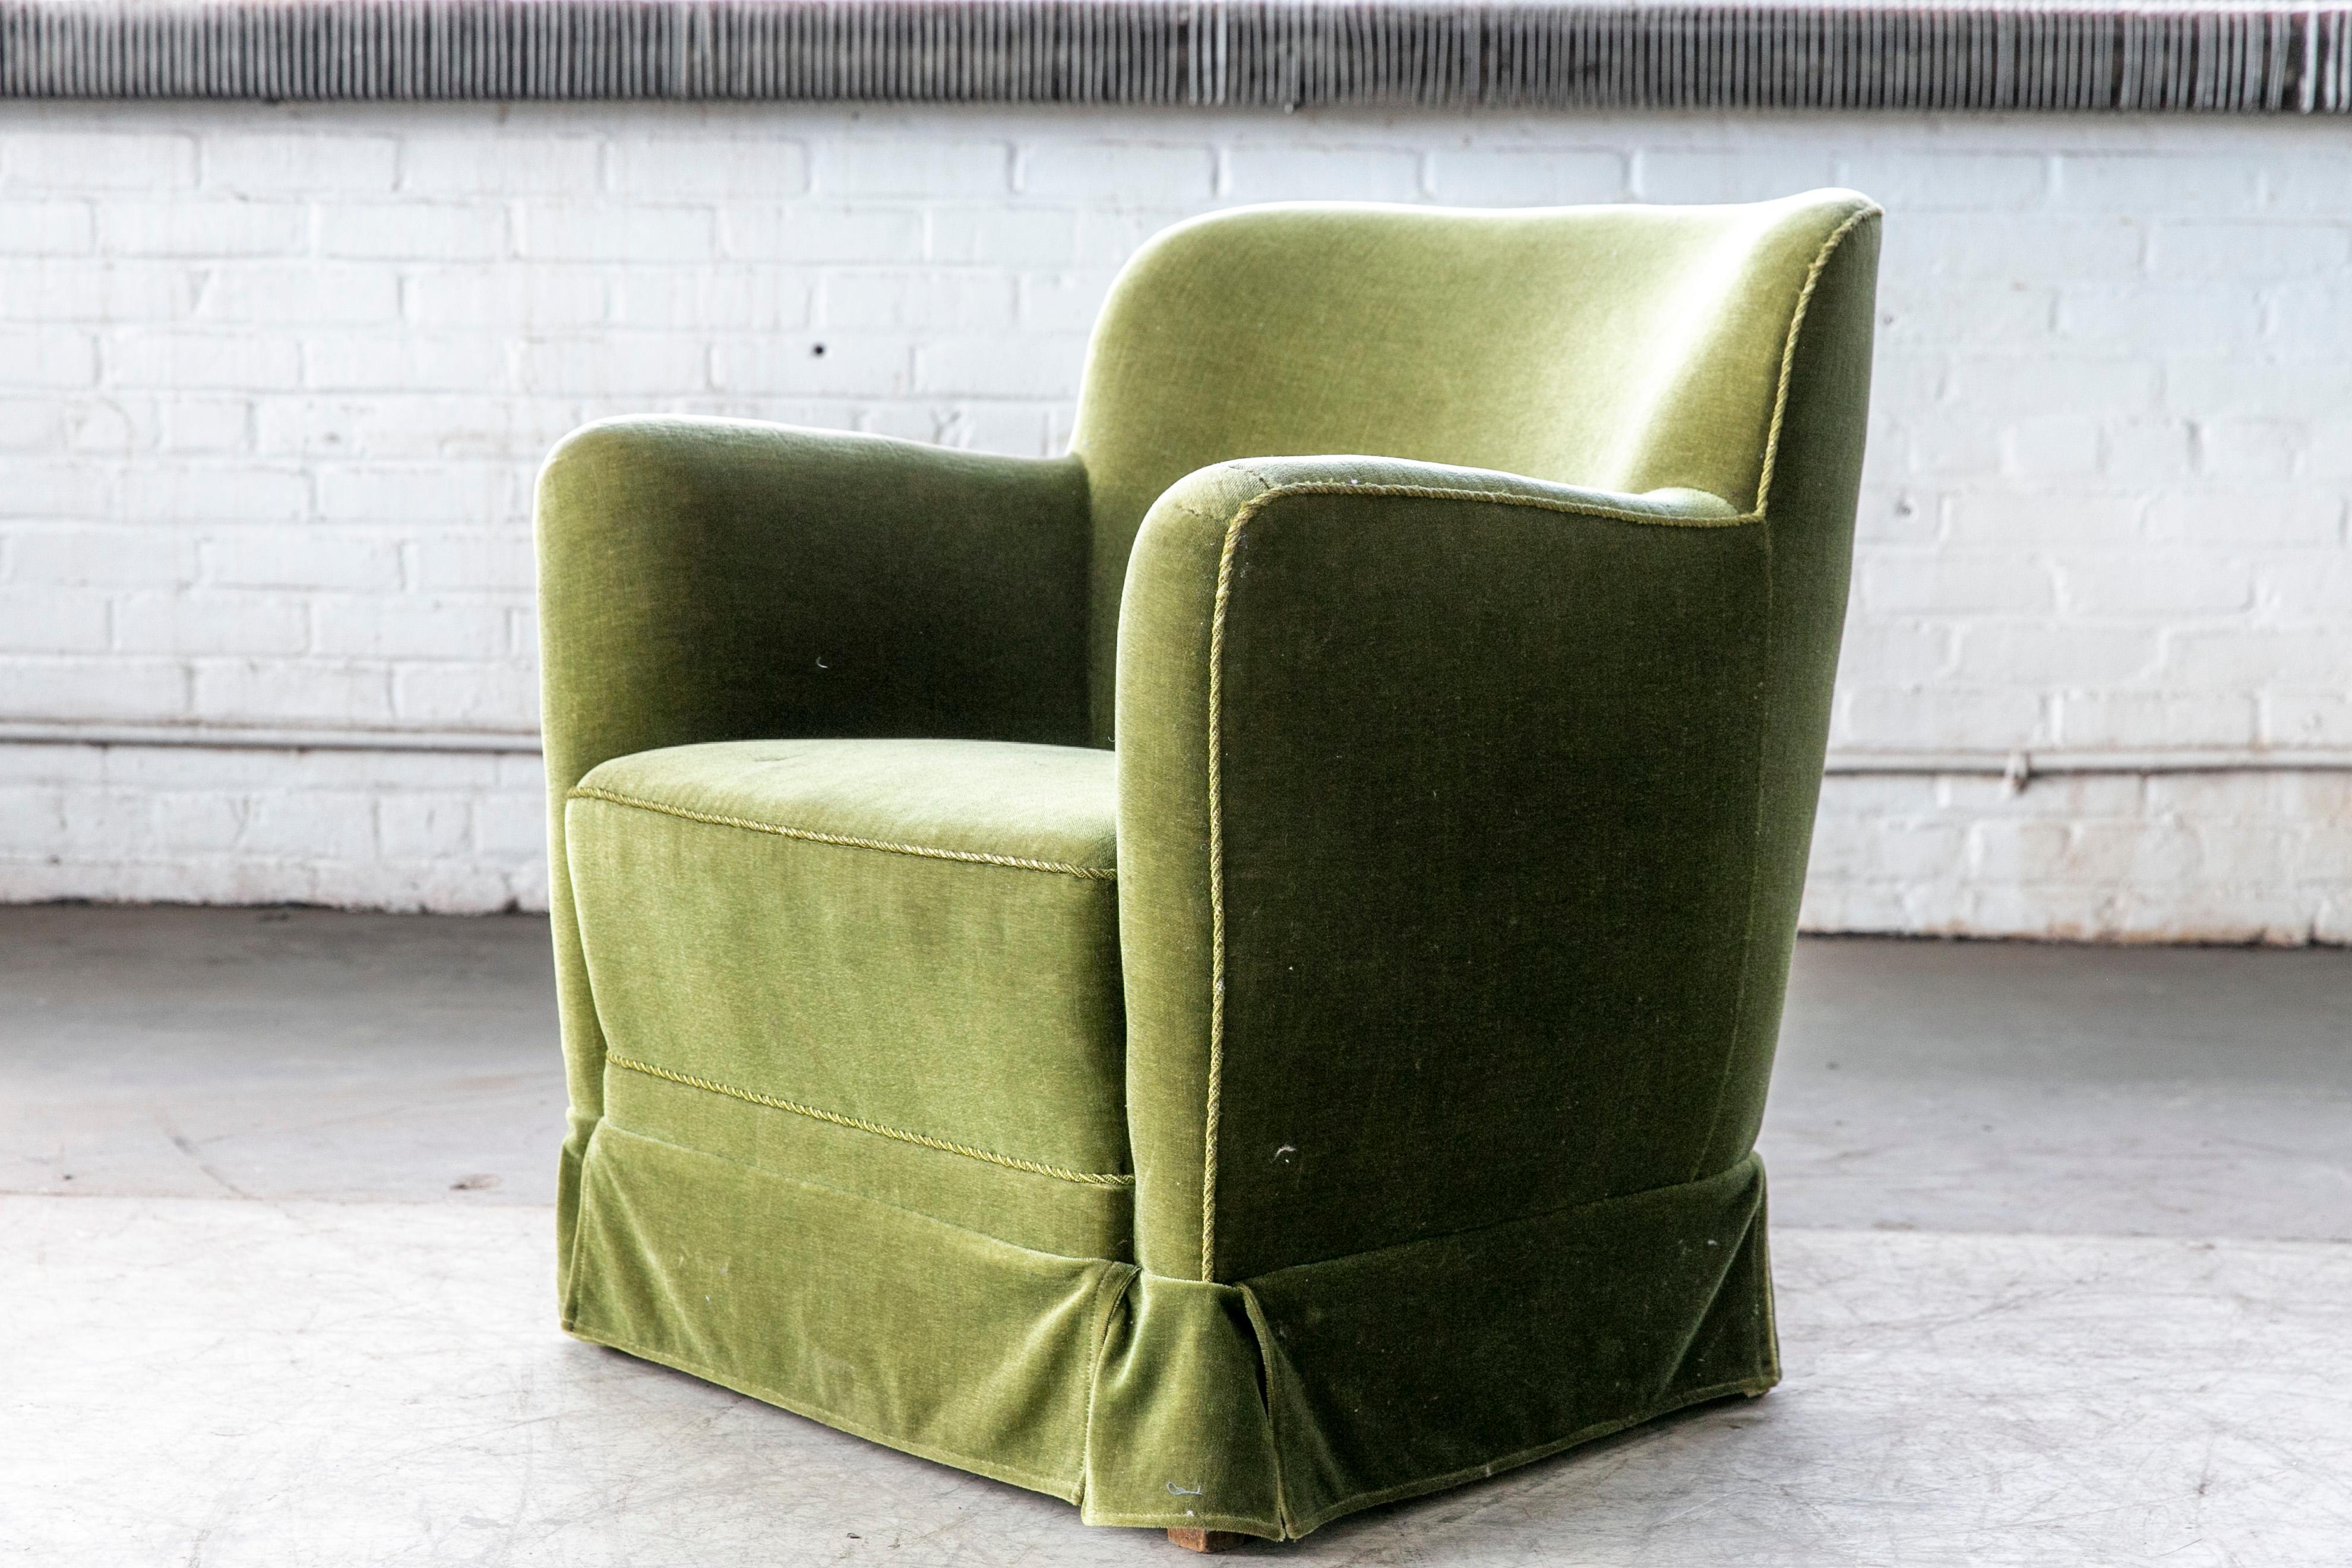 Mid-Century Modern Danish Midcentury Lounge or Club Chair in Emerald Green Mohair, 1940s